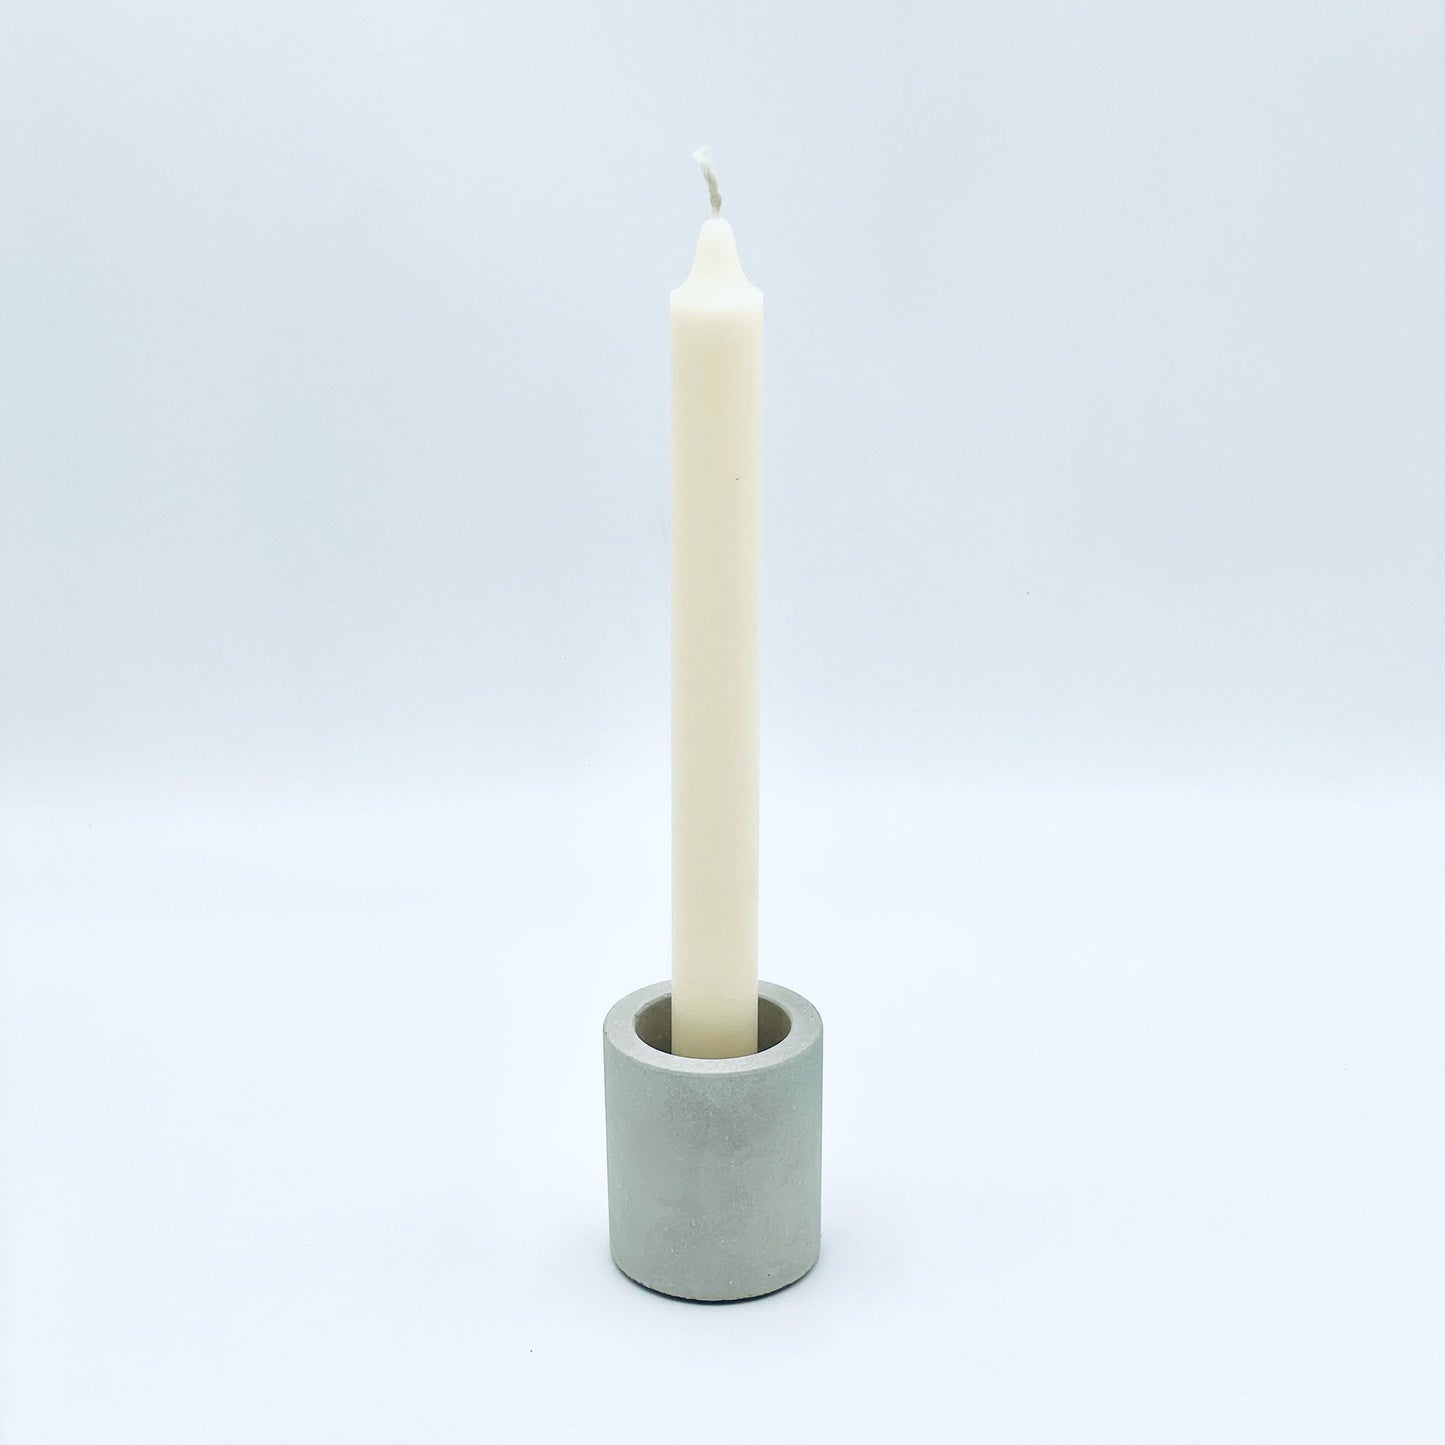 Universal glass candlestick for tea and taper candles, cylinder